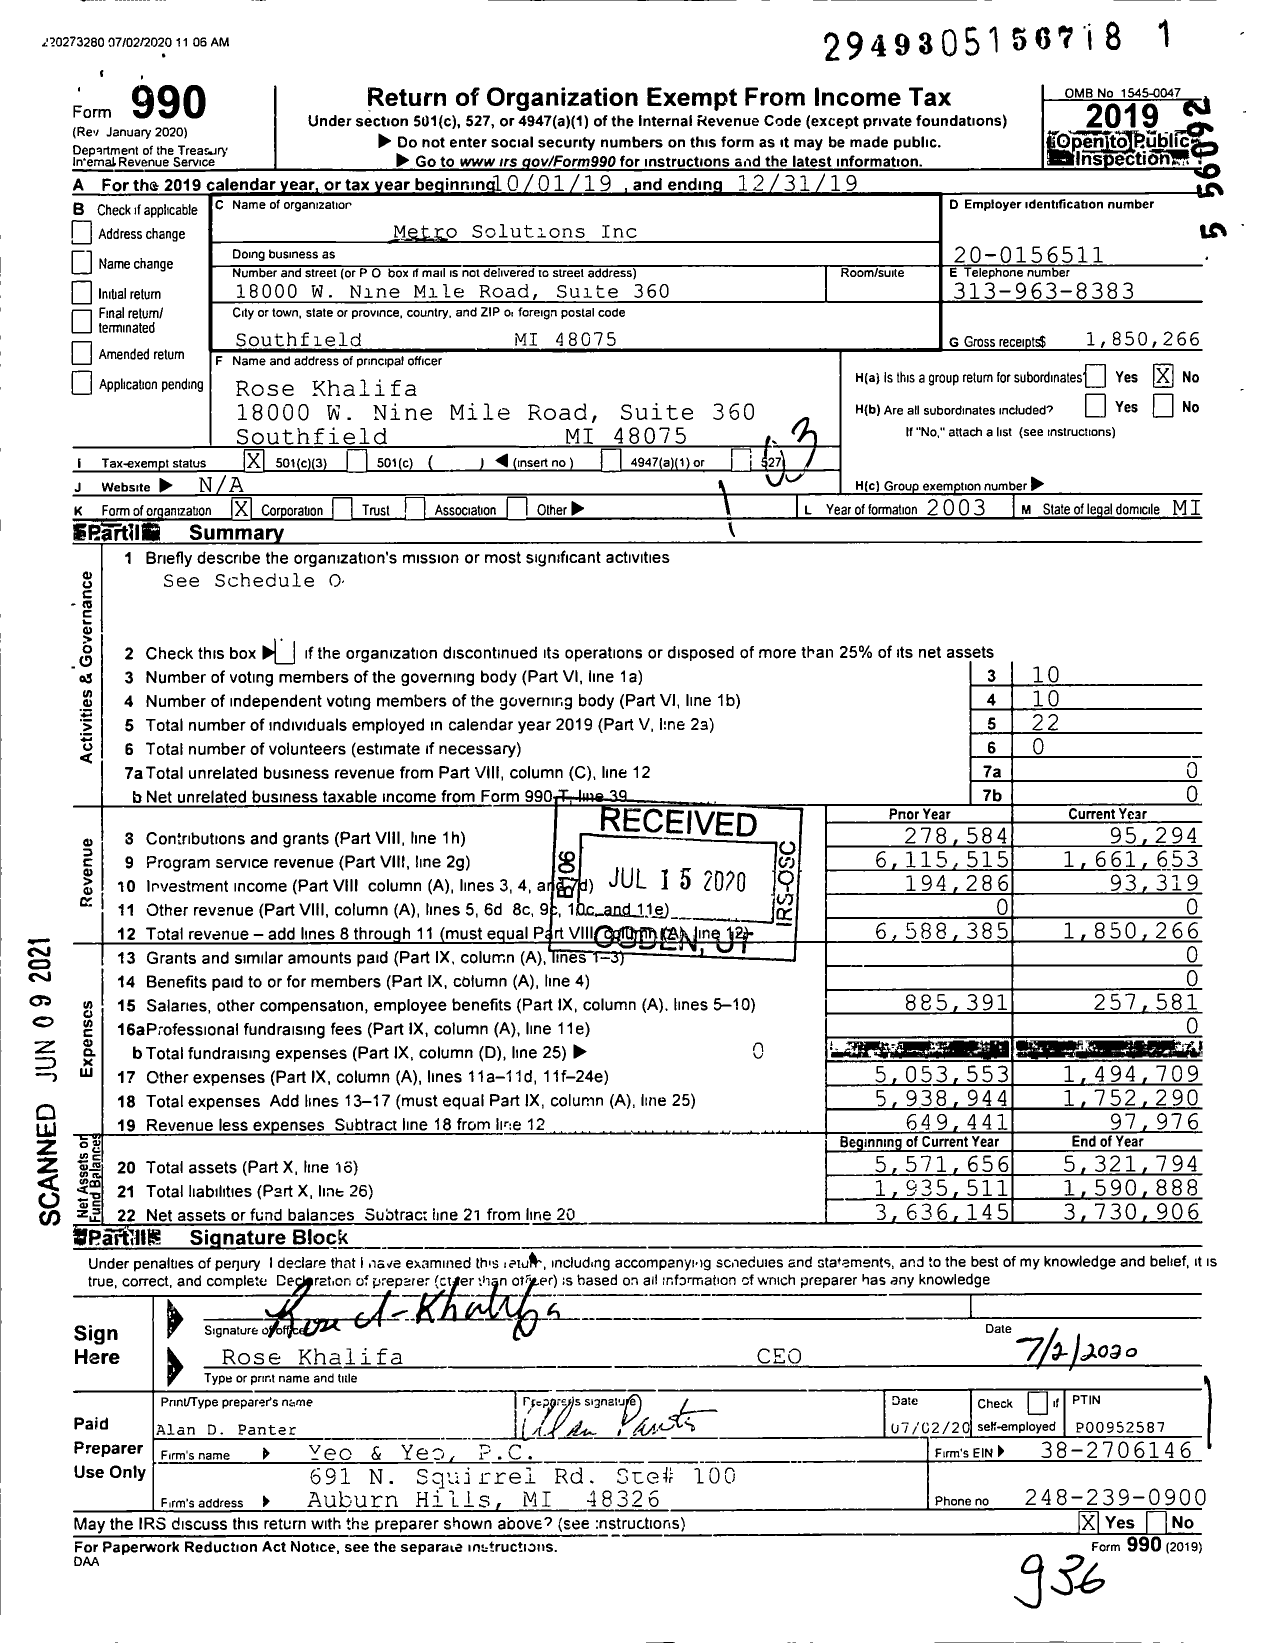 Image of first page of 2019 Form 990 for Metro Solutions